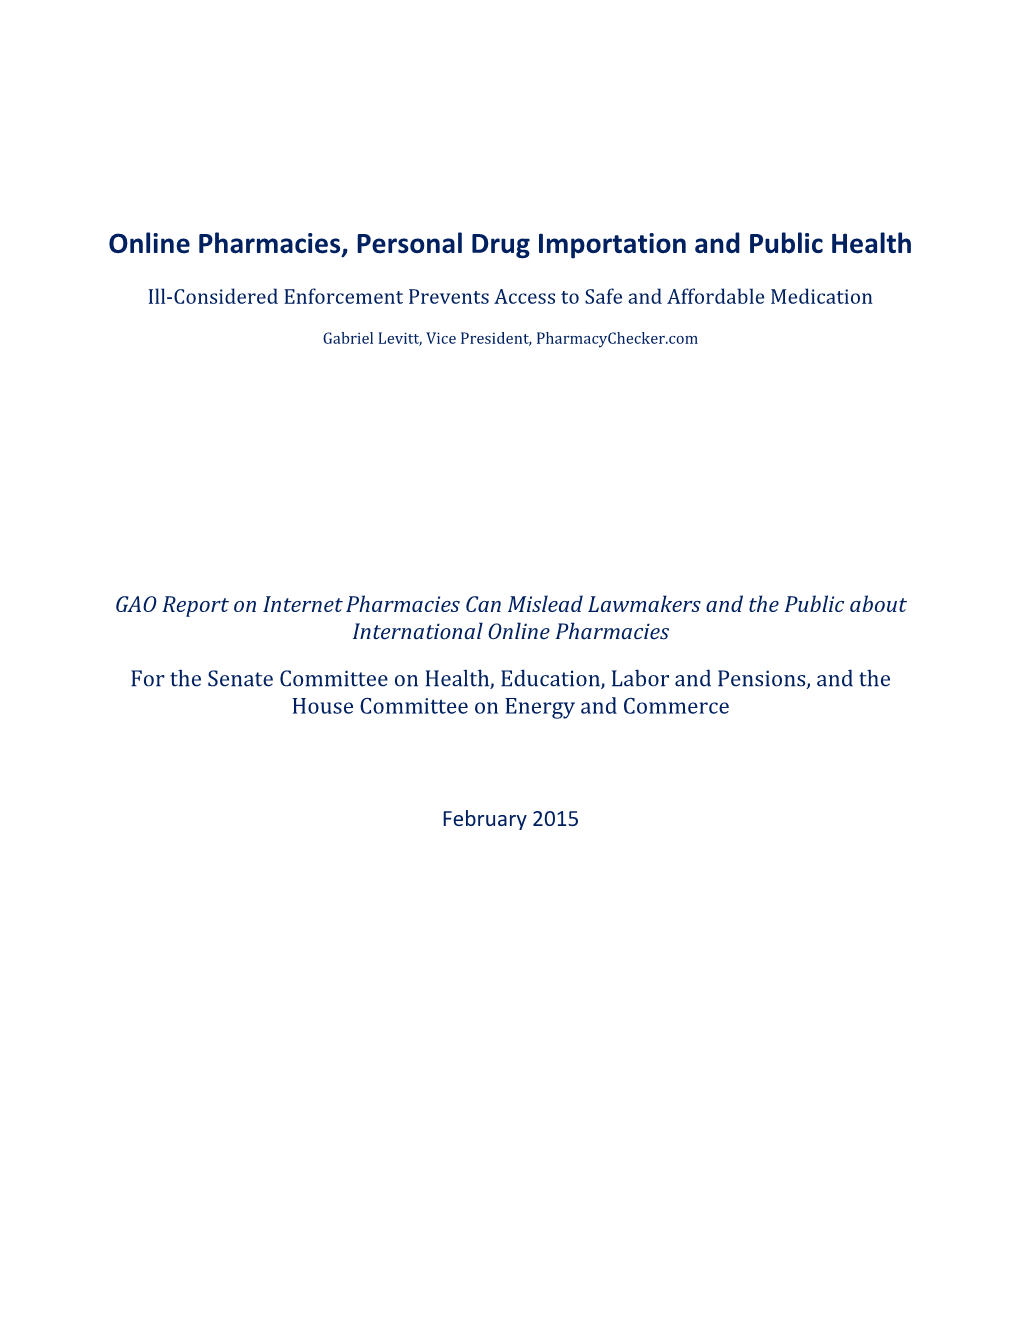 Online Pharmacies, Personal Drug Importation and Public Health